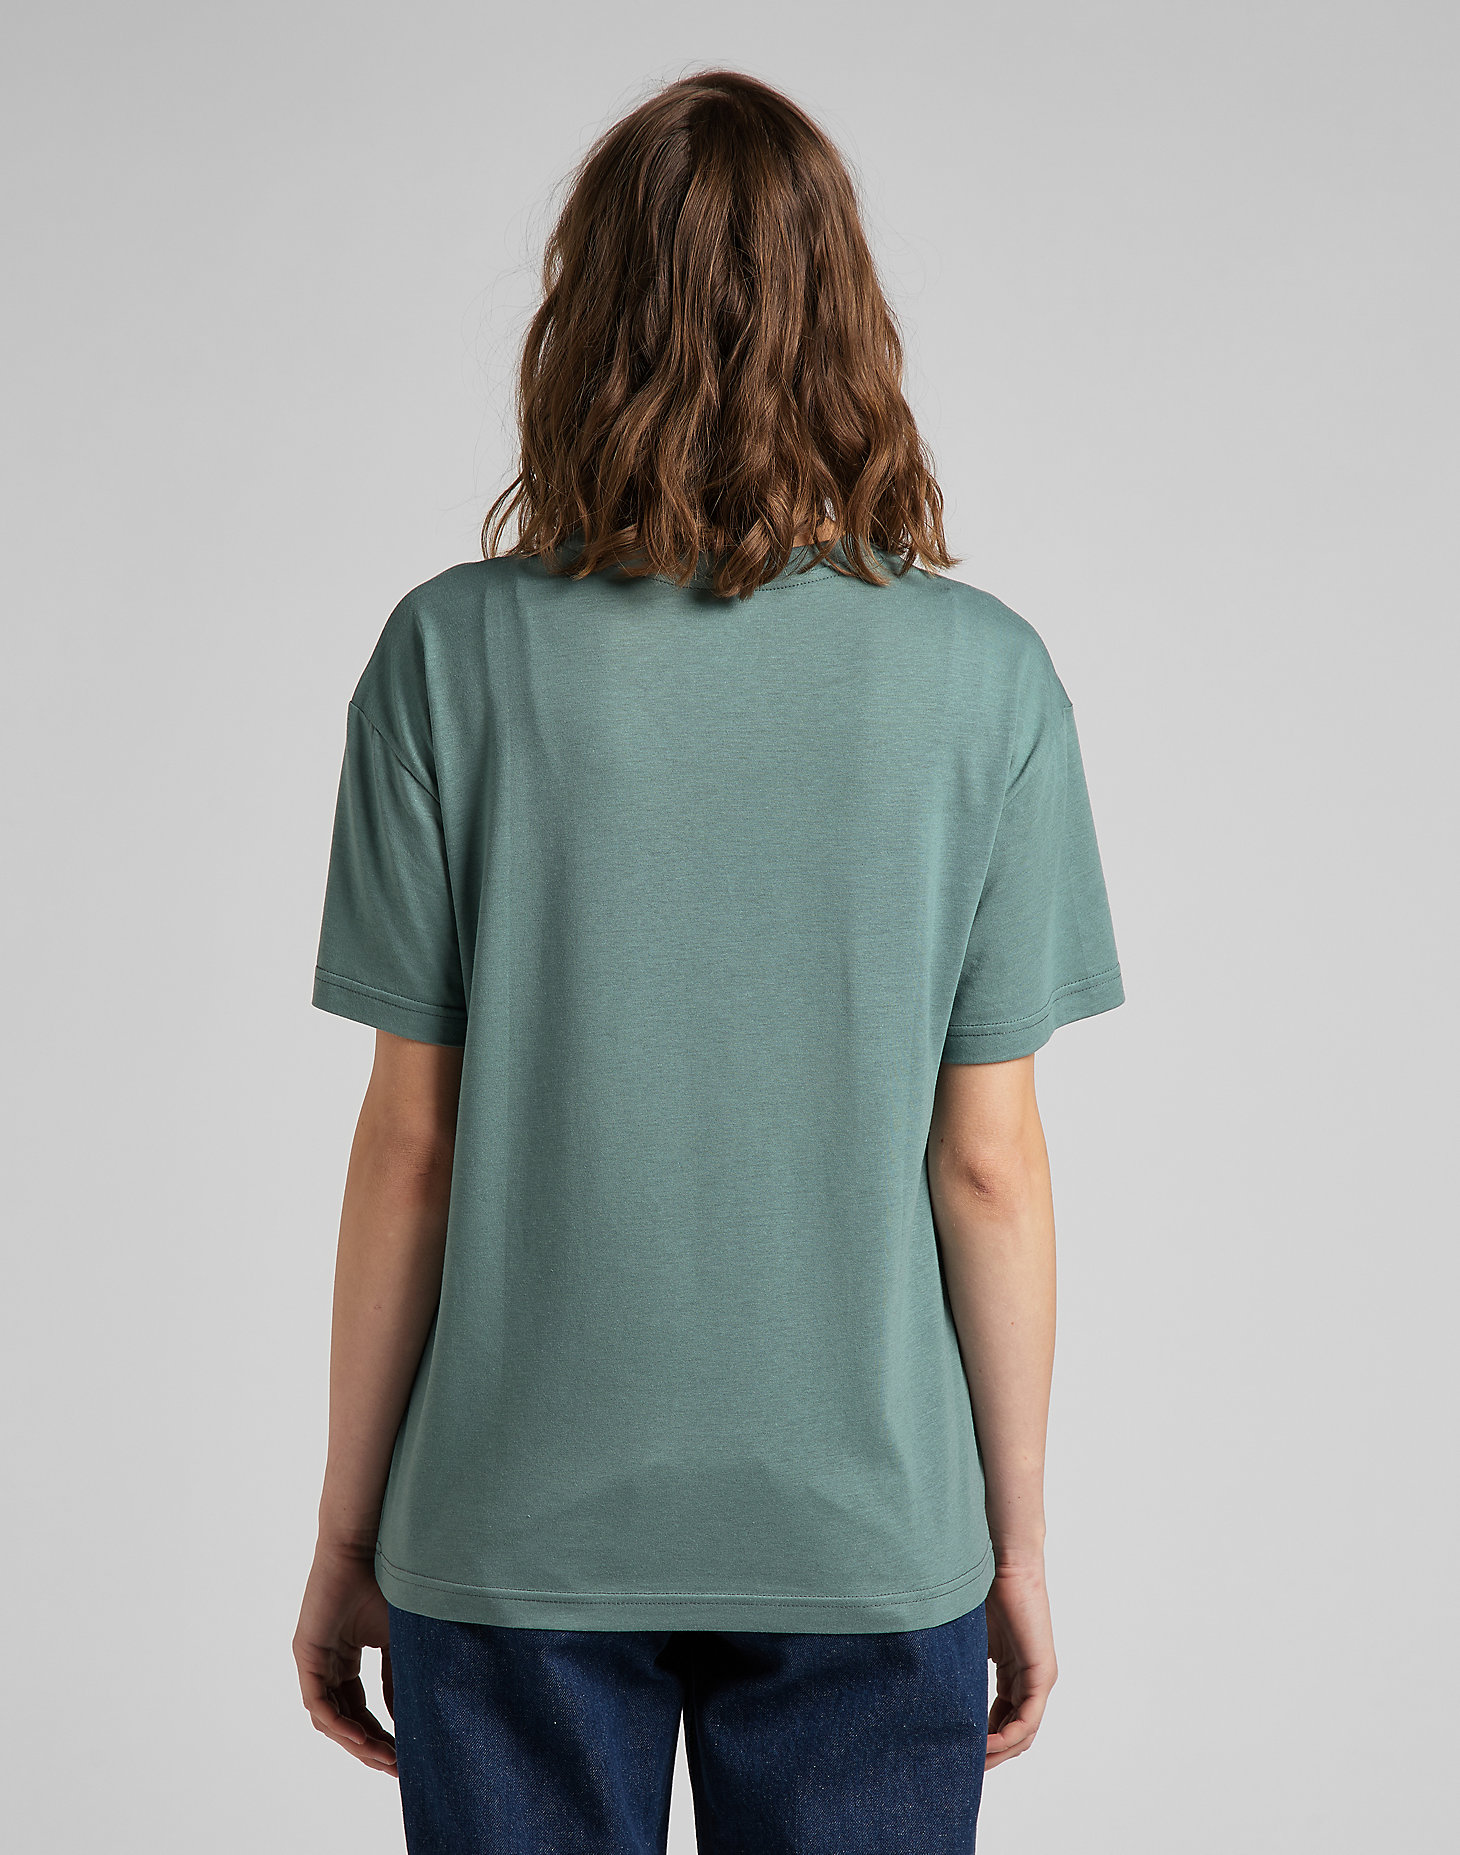 Relaxed Crew Tee in Steel Green alternative view 1